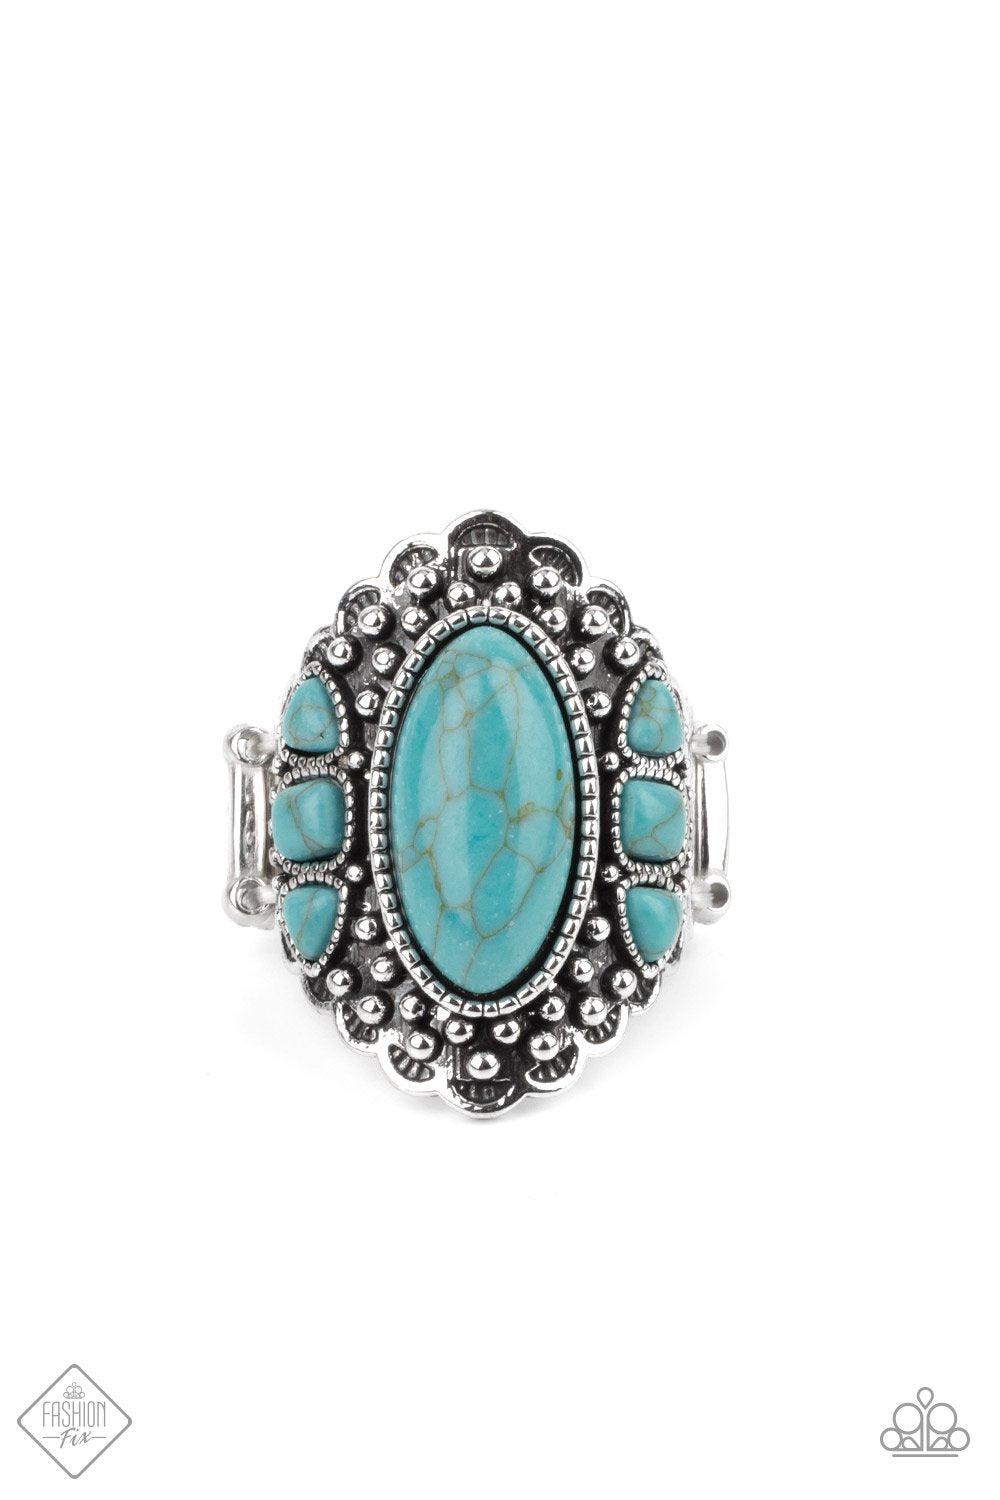 Rustler Road Turquoise Blue Stone Ring - Paparazzi Accessories- lightbox - CarasShop.com - $5 Jewelry by Cara Jewels